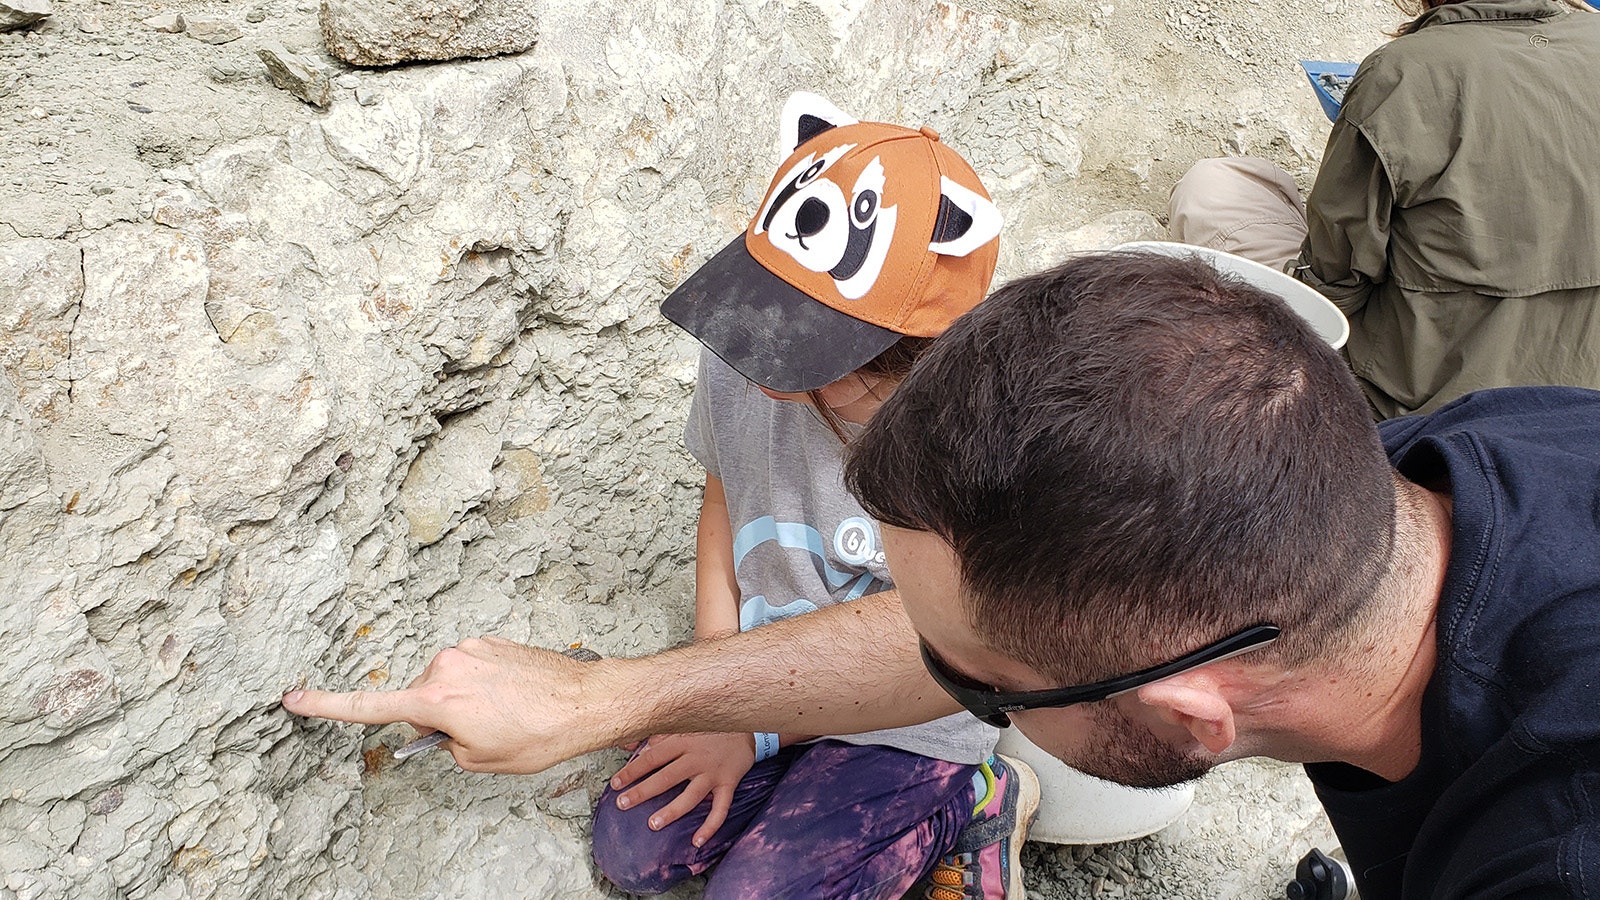 Dean Lomax stops to help 6-year-old Sierra, who wants to be a paleontologist someday, read the cliff wall to decide where to dig for a fossil.